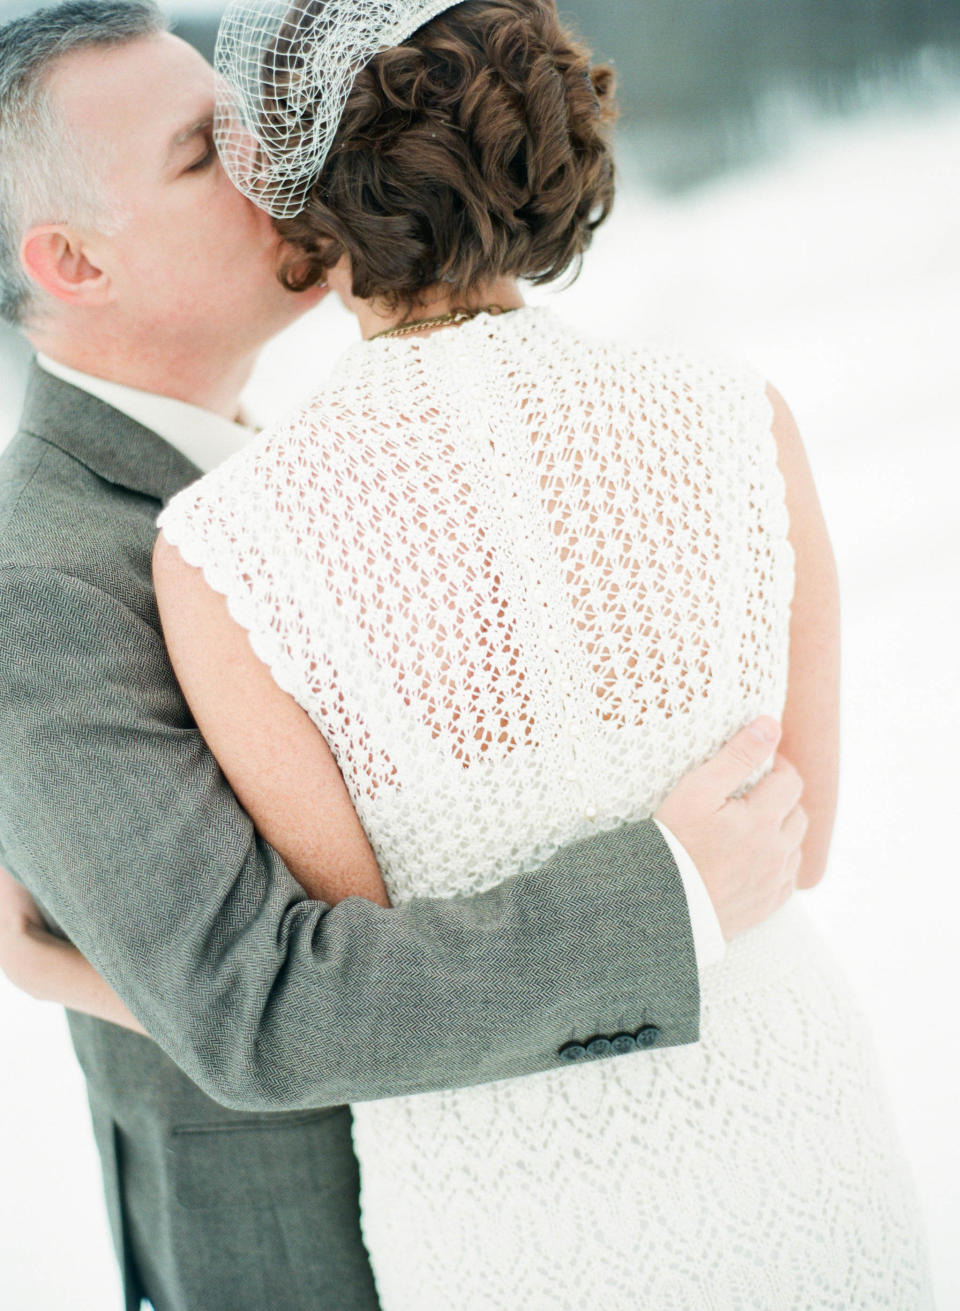 "This was my second marriage. My first husband died, and I knit heavy sweaters throughout his illness. I felt it was fitting for me to knit something light and beautiful for a joyous occasion. It brought a sort of healing for me,"&nbsp;bride&nbsp;Emily Wharton told HuffPost. "My husband calls my dress my 'magnum opus.' It truly was the most difficult thing I have ever knit, and I was very careful to ensure that there were absolutely no mistakes in it, which meant I did a lot of ripping out and re-knitting."